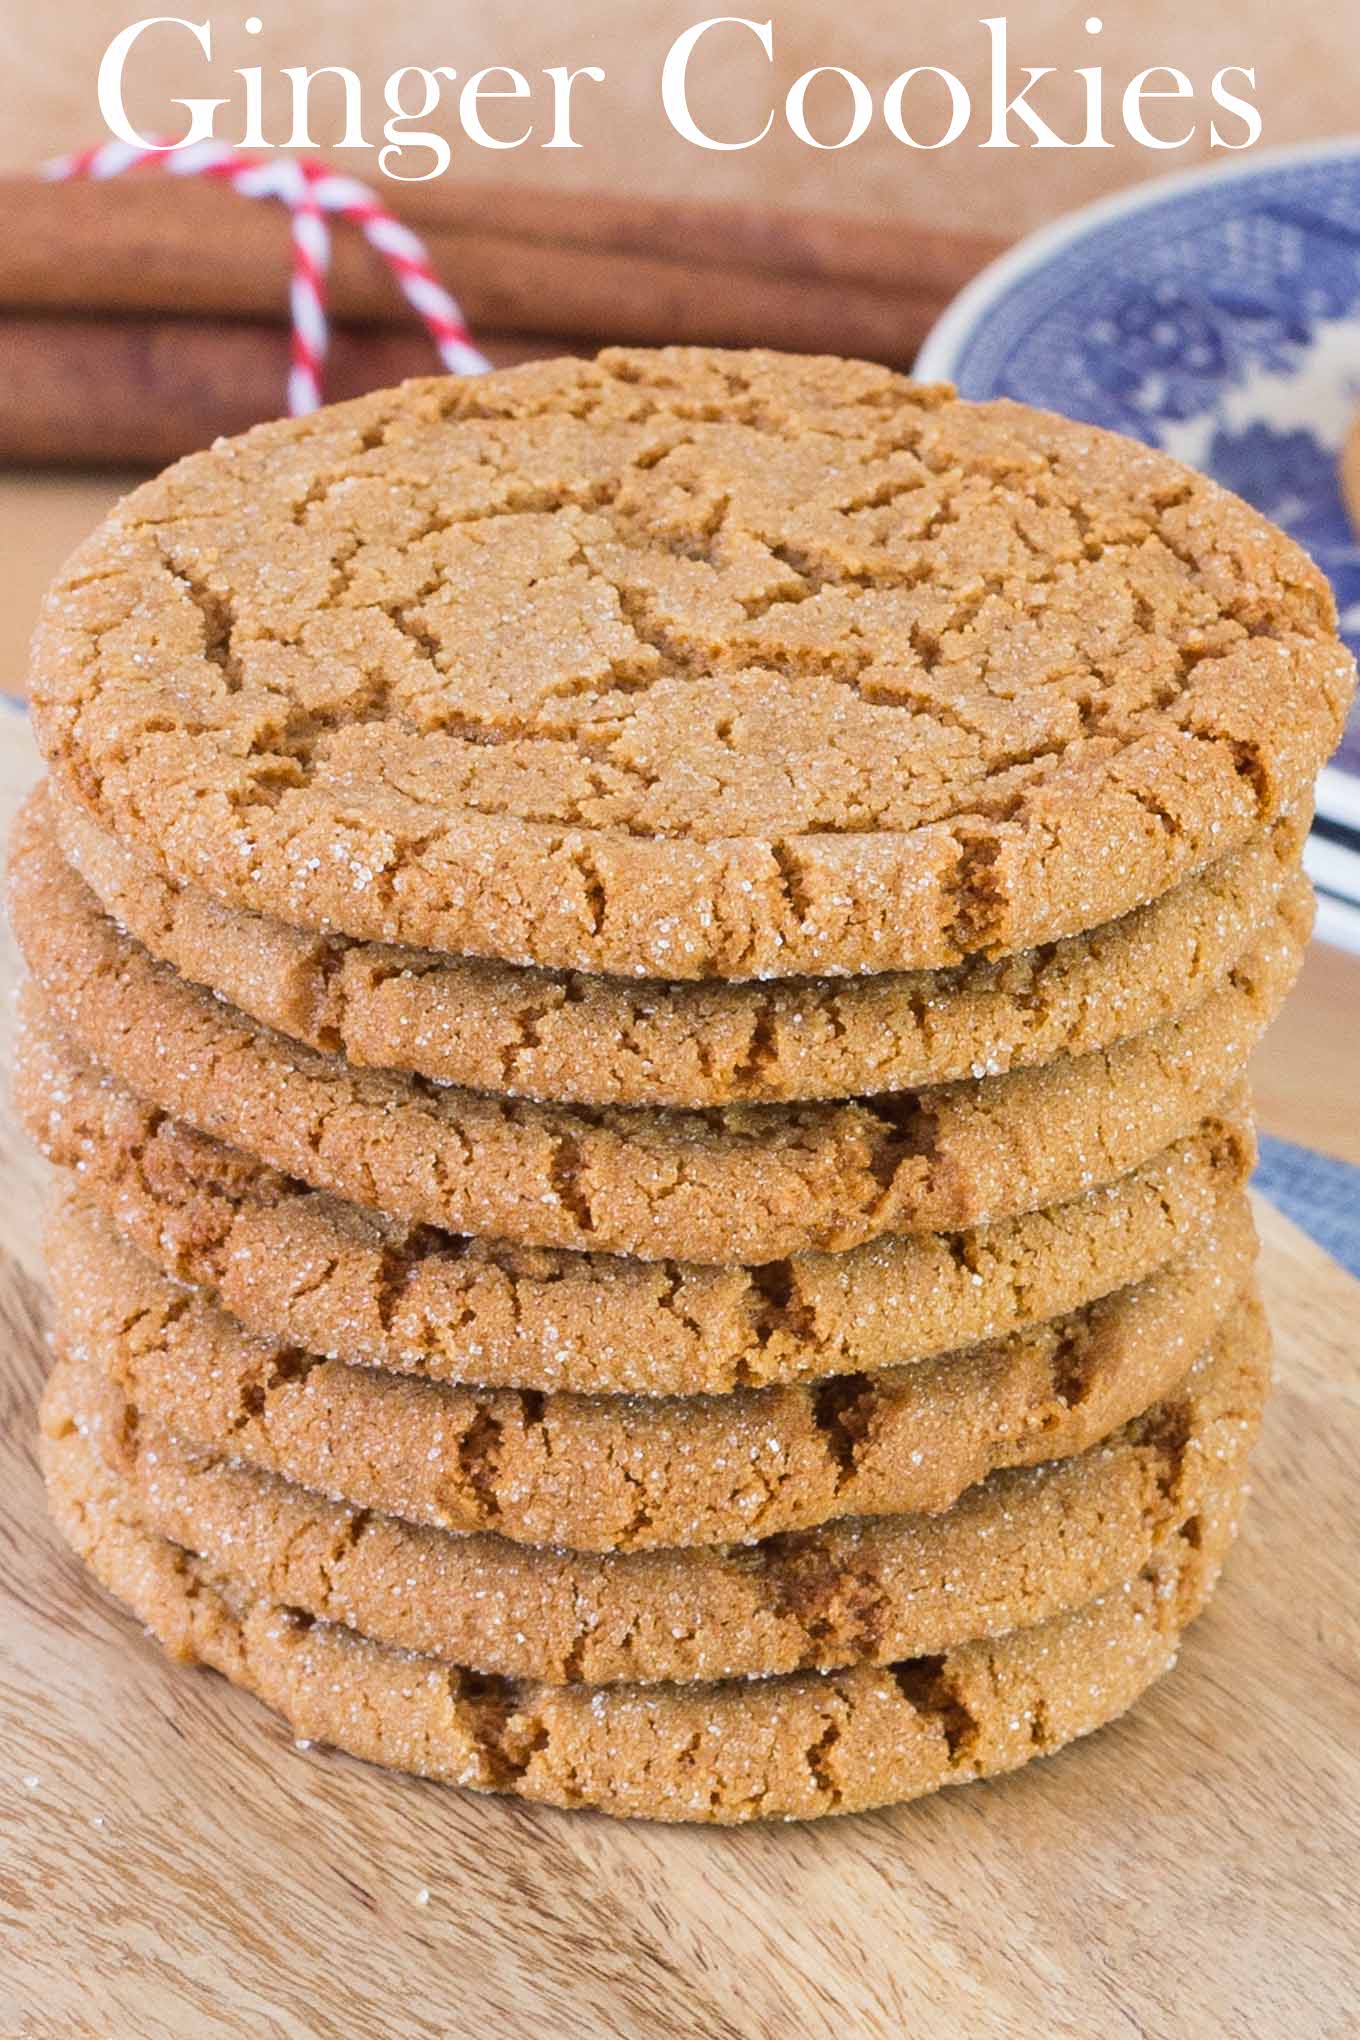 Ginger Cookies that are perfectly spiced with tasty ginger and molasses. Crispy on the outside and chewy on the inside. via @artandthekitch